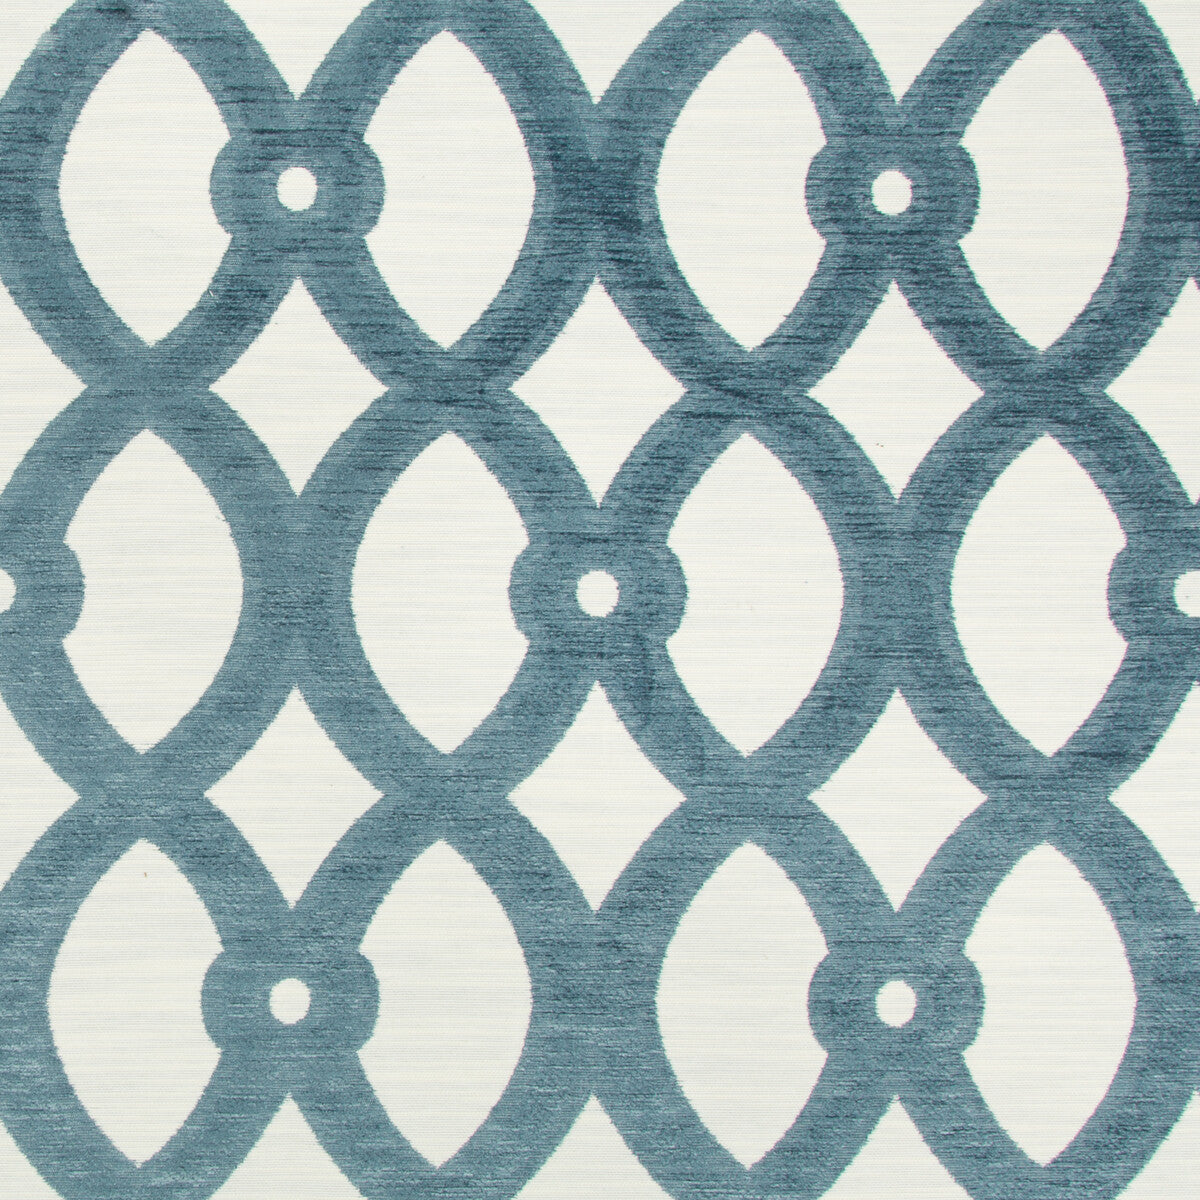 Kravet Design fabric in 34702-5 color - pattern 34702.5.0 - by Kravet Design in the Crypton Home collection